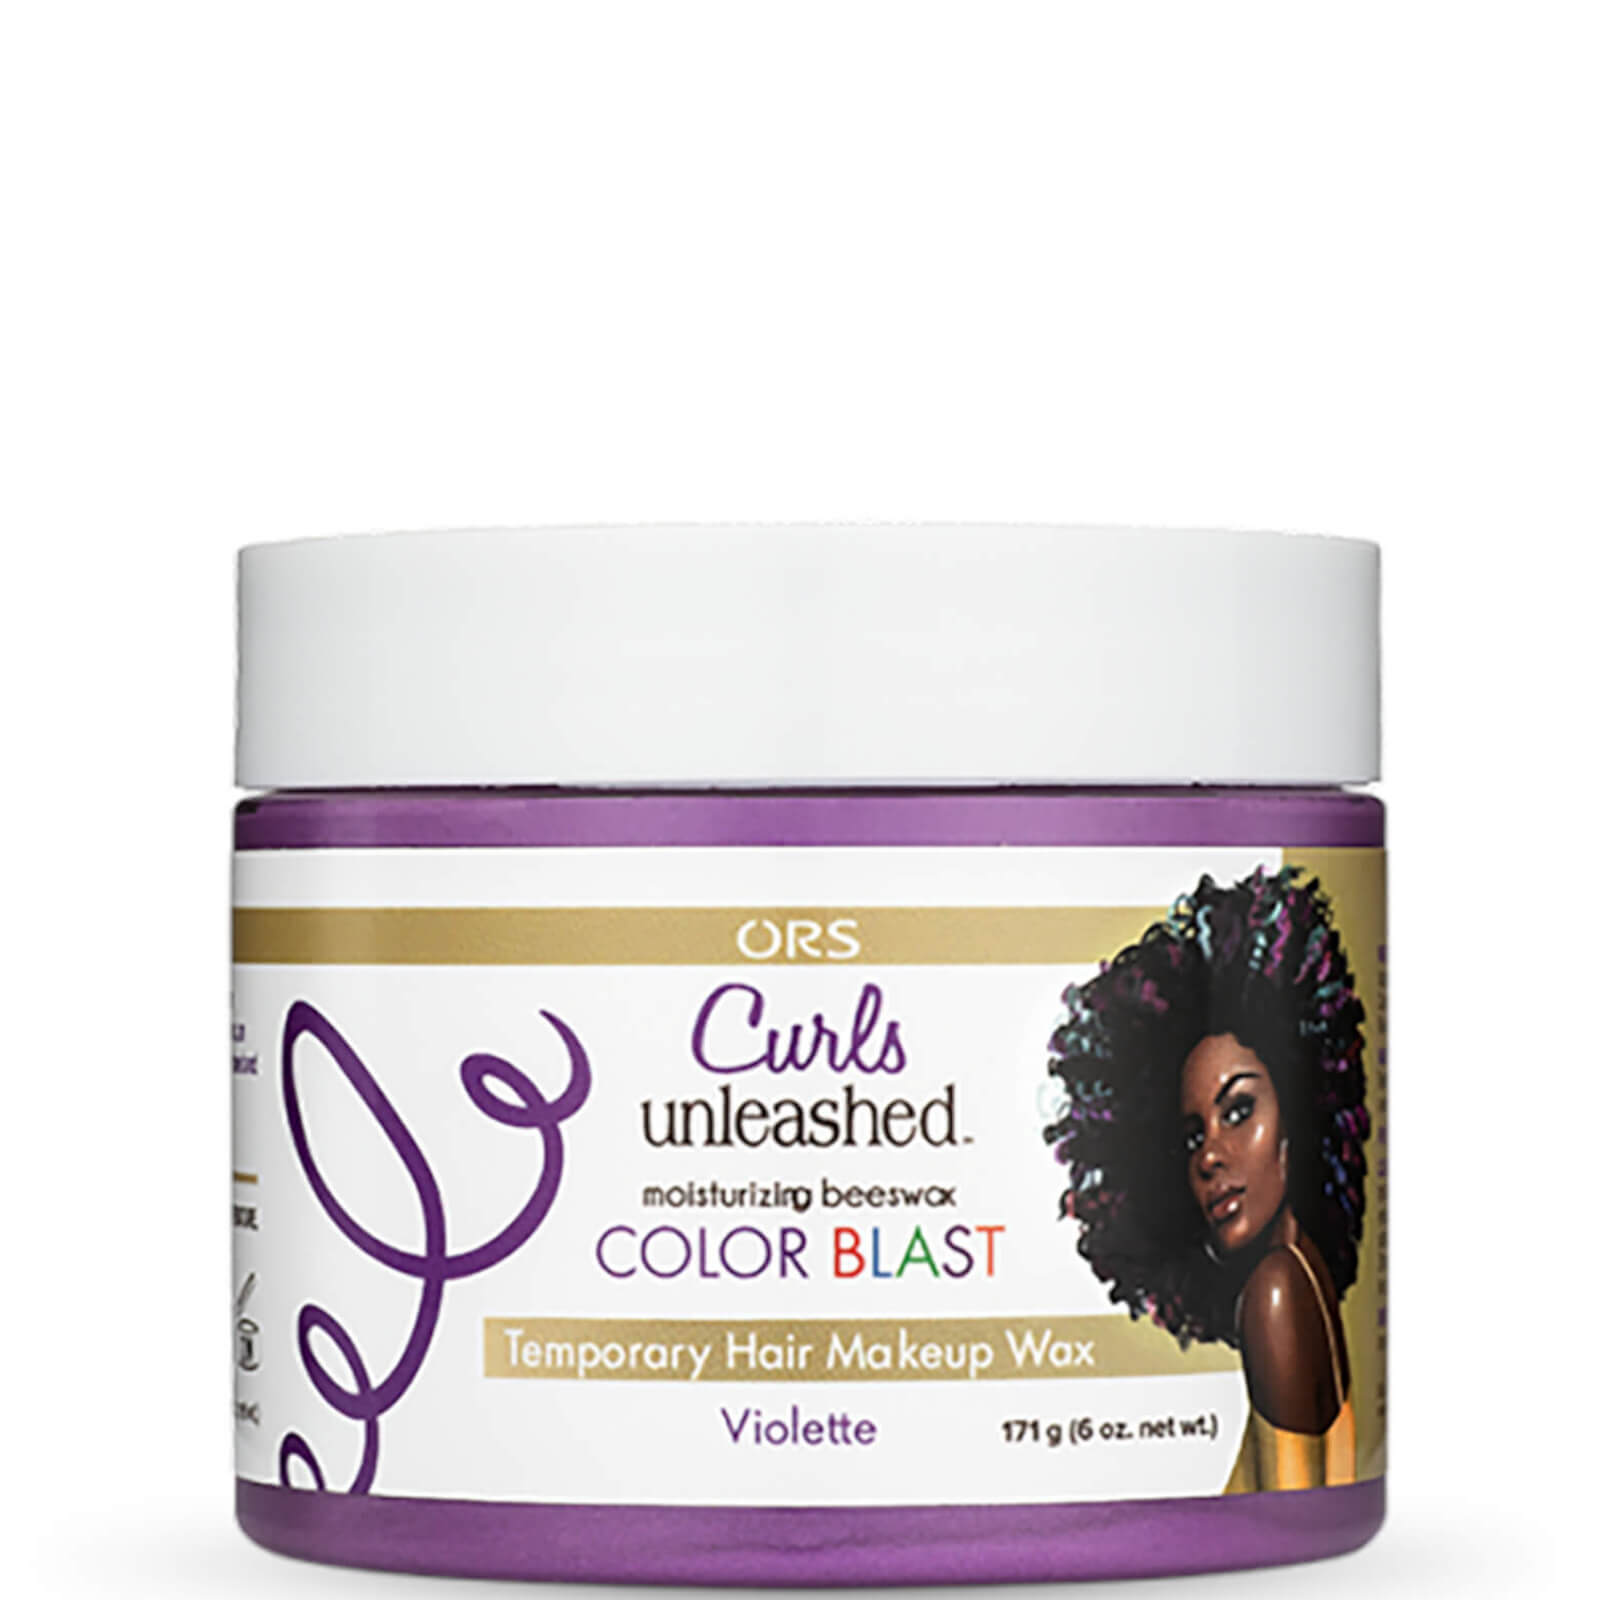 Image of Hair Makeup Wax Curls Unleashed Colour Blast Temporary - Violette ORS